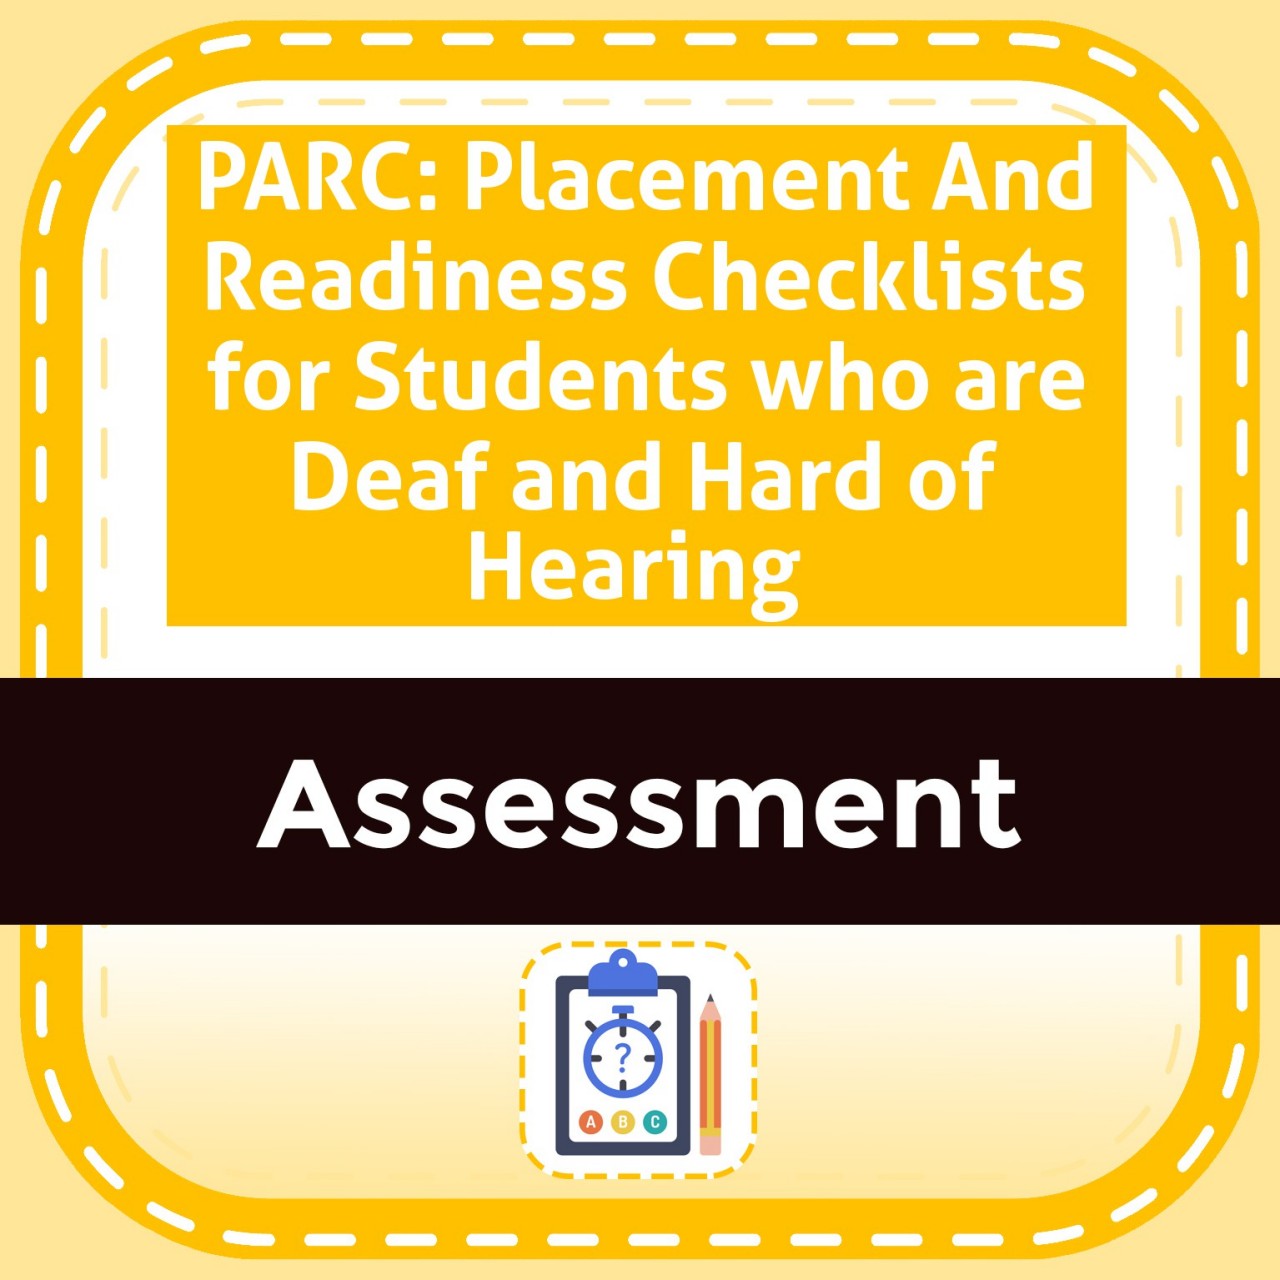 PARC: Placement And Readiness Checklists for Students who are Deaf and Hard of Hearing 